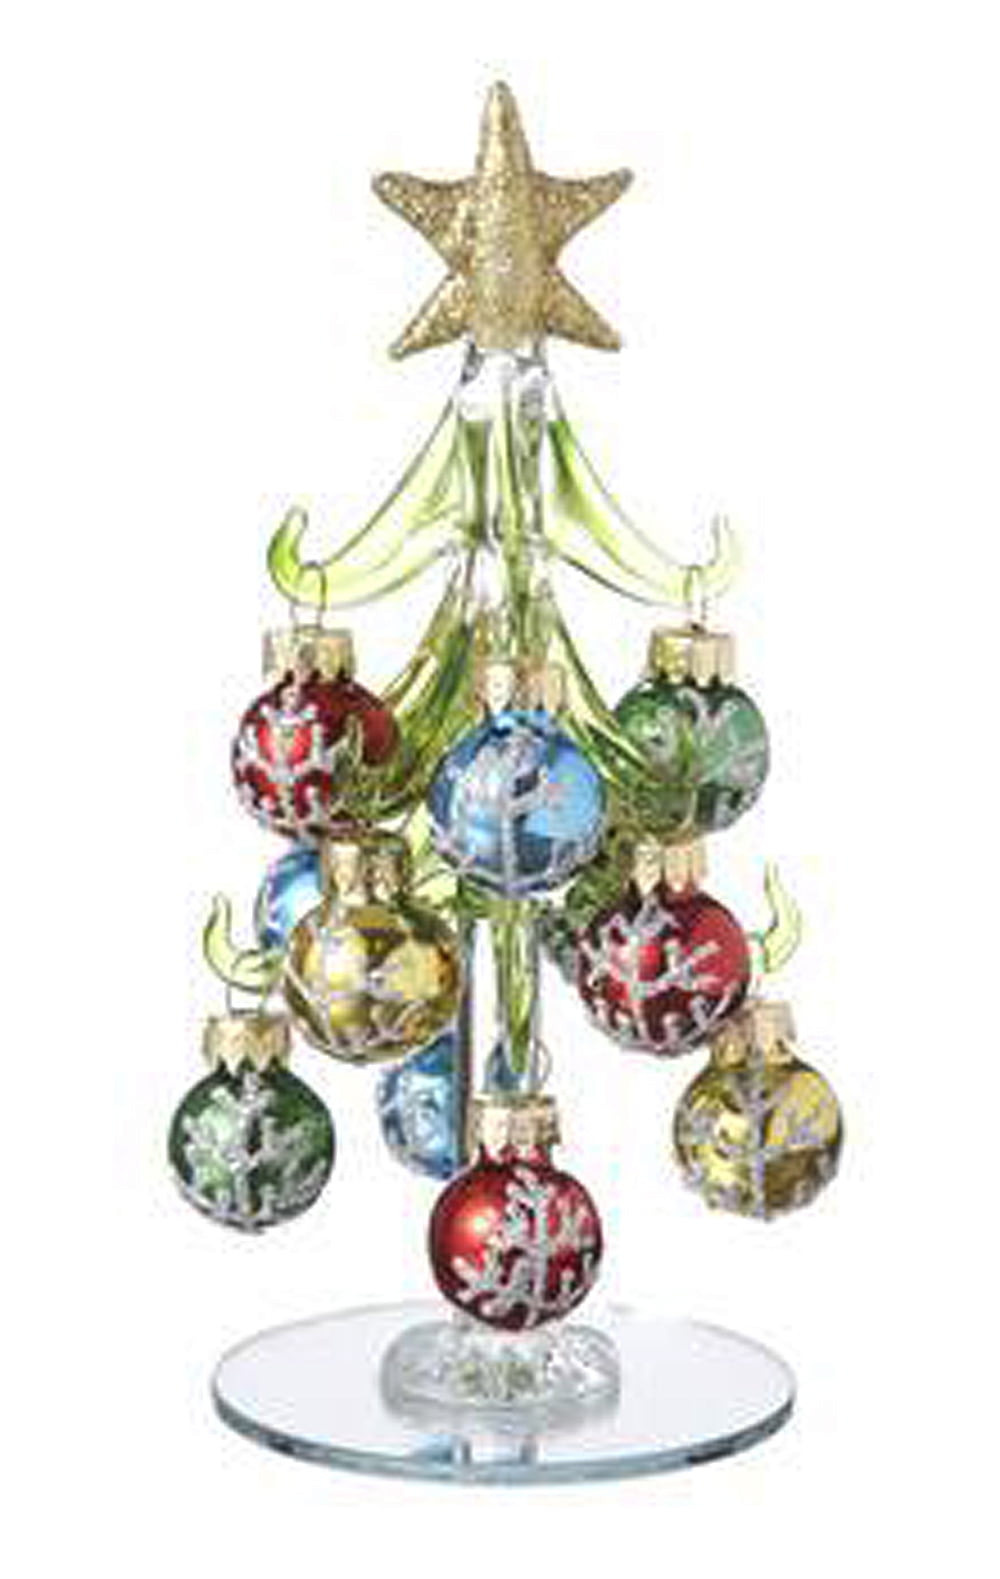 Frosted Snowflake Ornaments on Glass Christmas Trees by Ganz - Walmart.com